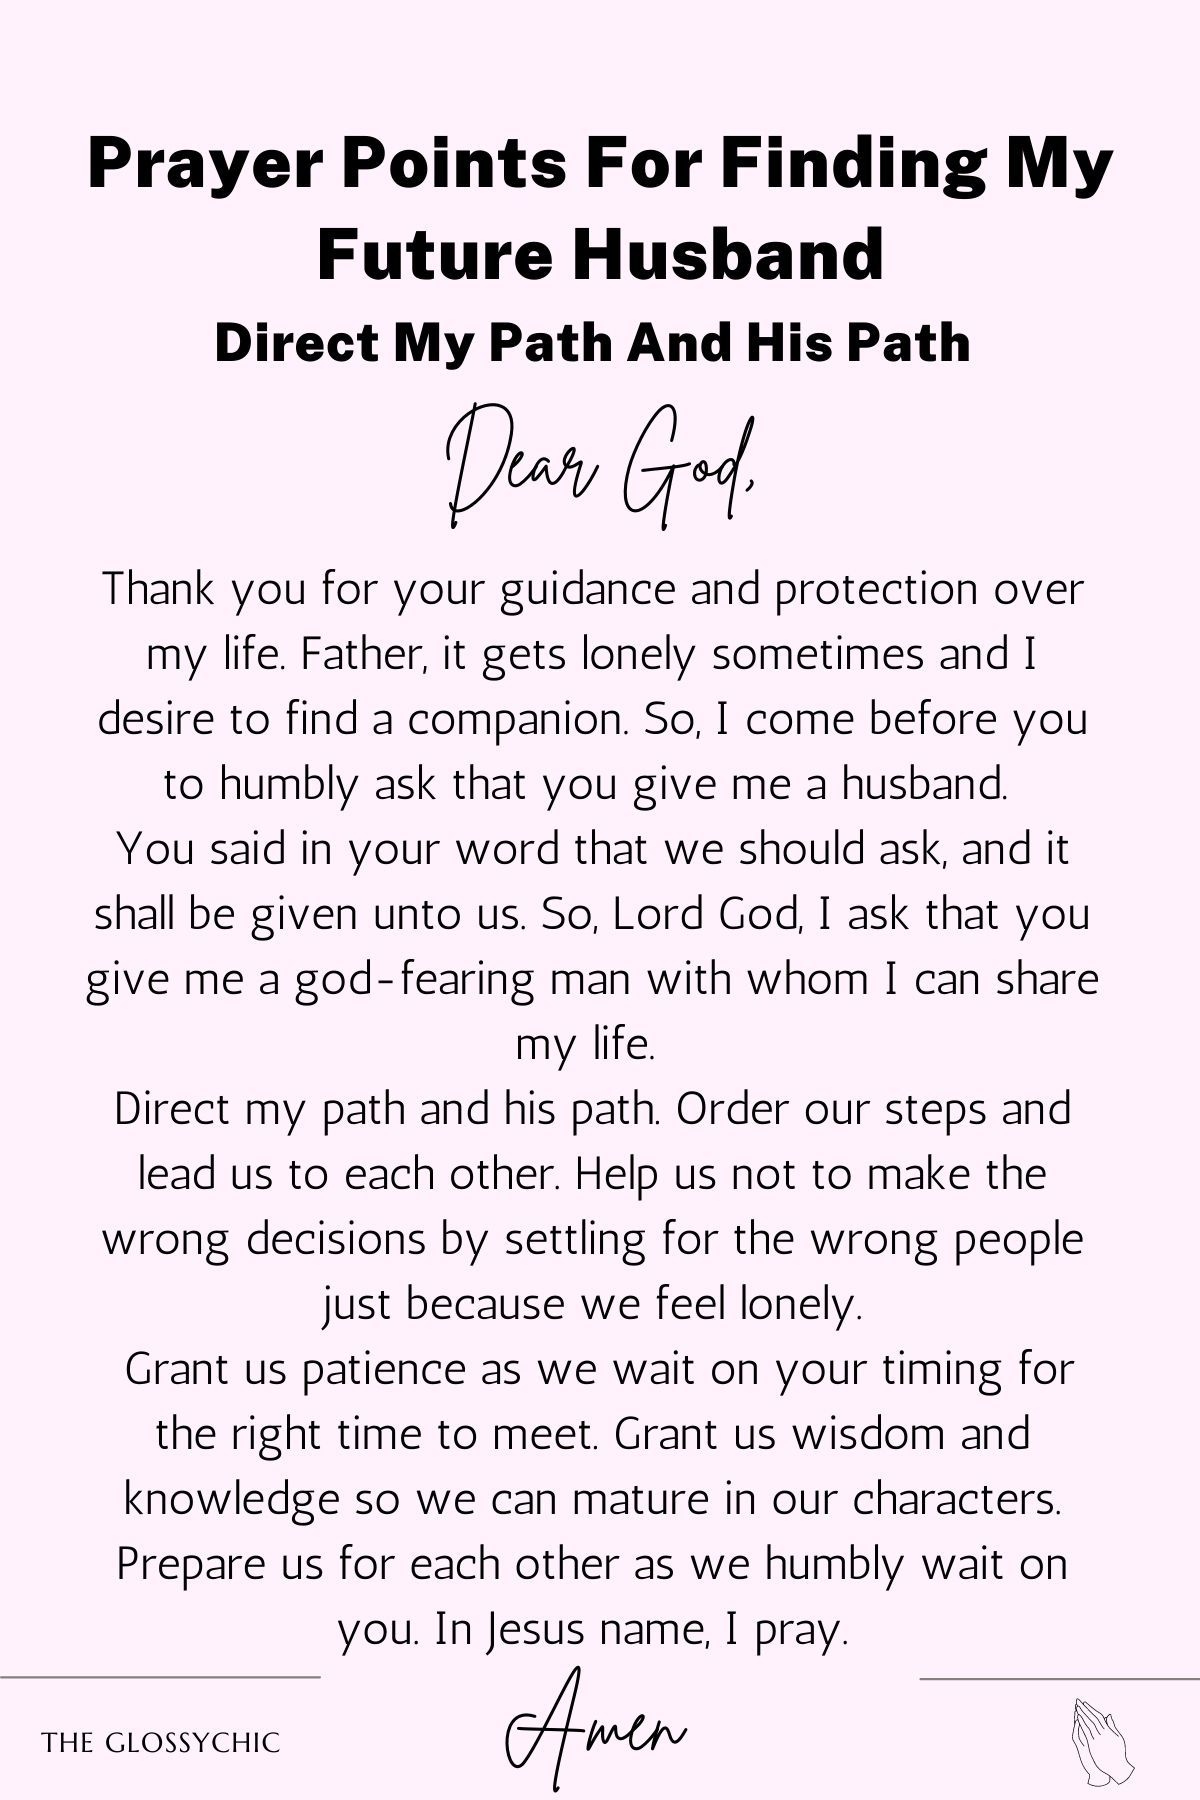 Direct My Path And His Path